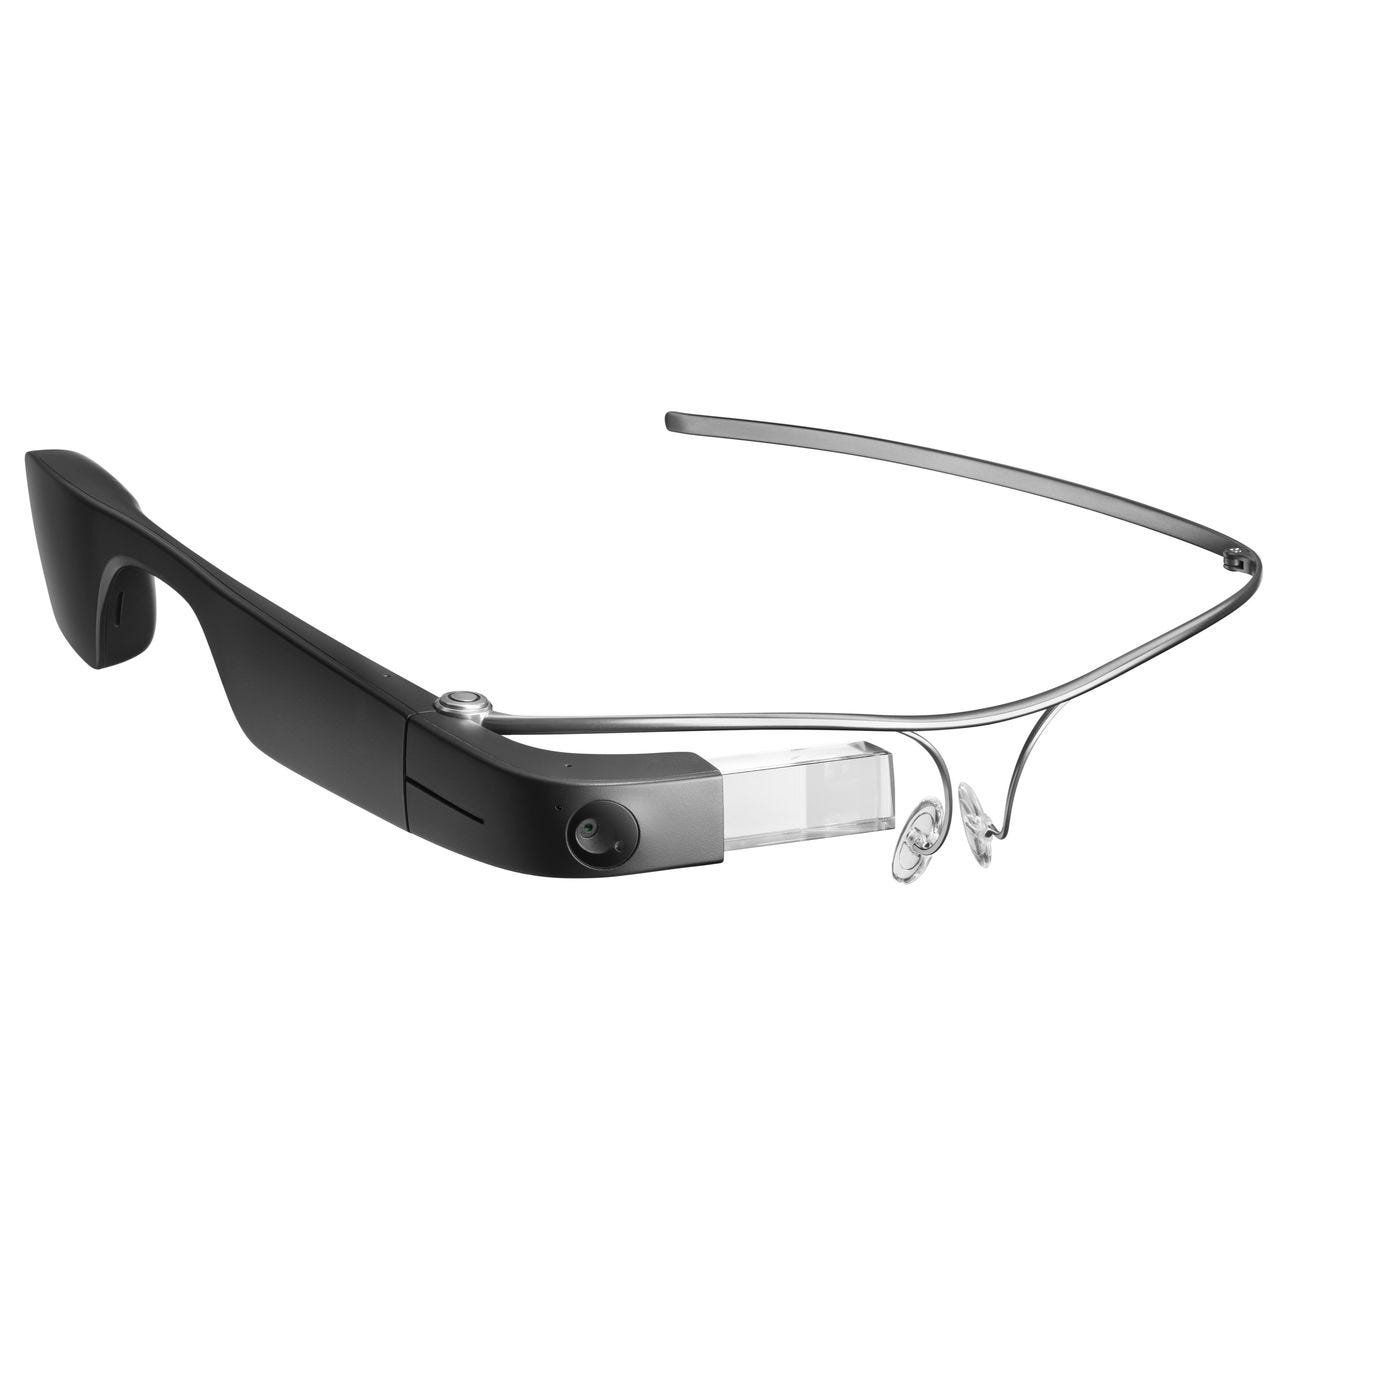 Google opens its latest Google Glass AR headset for direct purchase - The  Verge